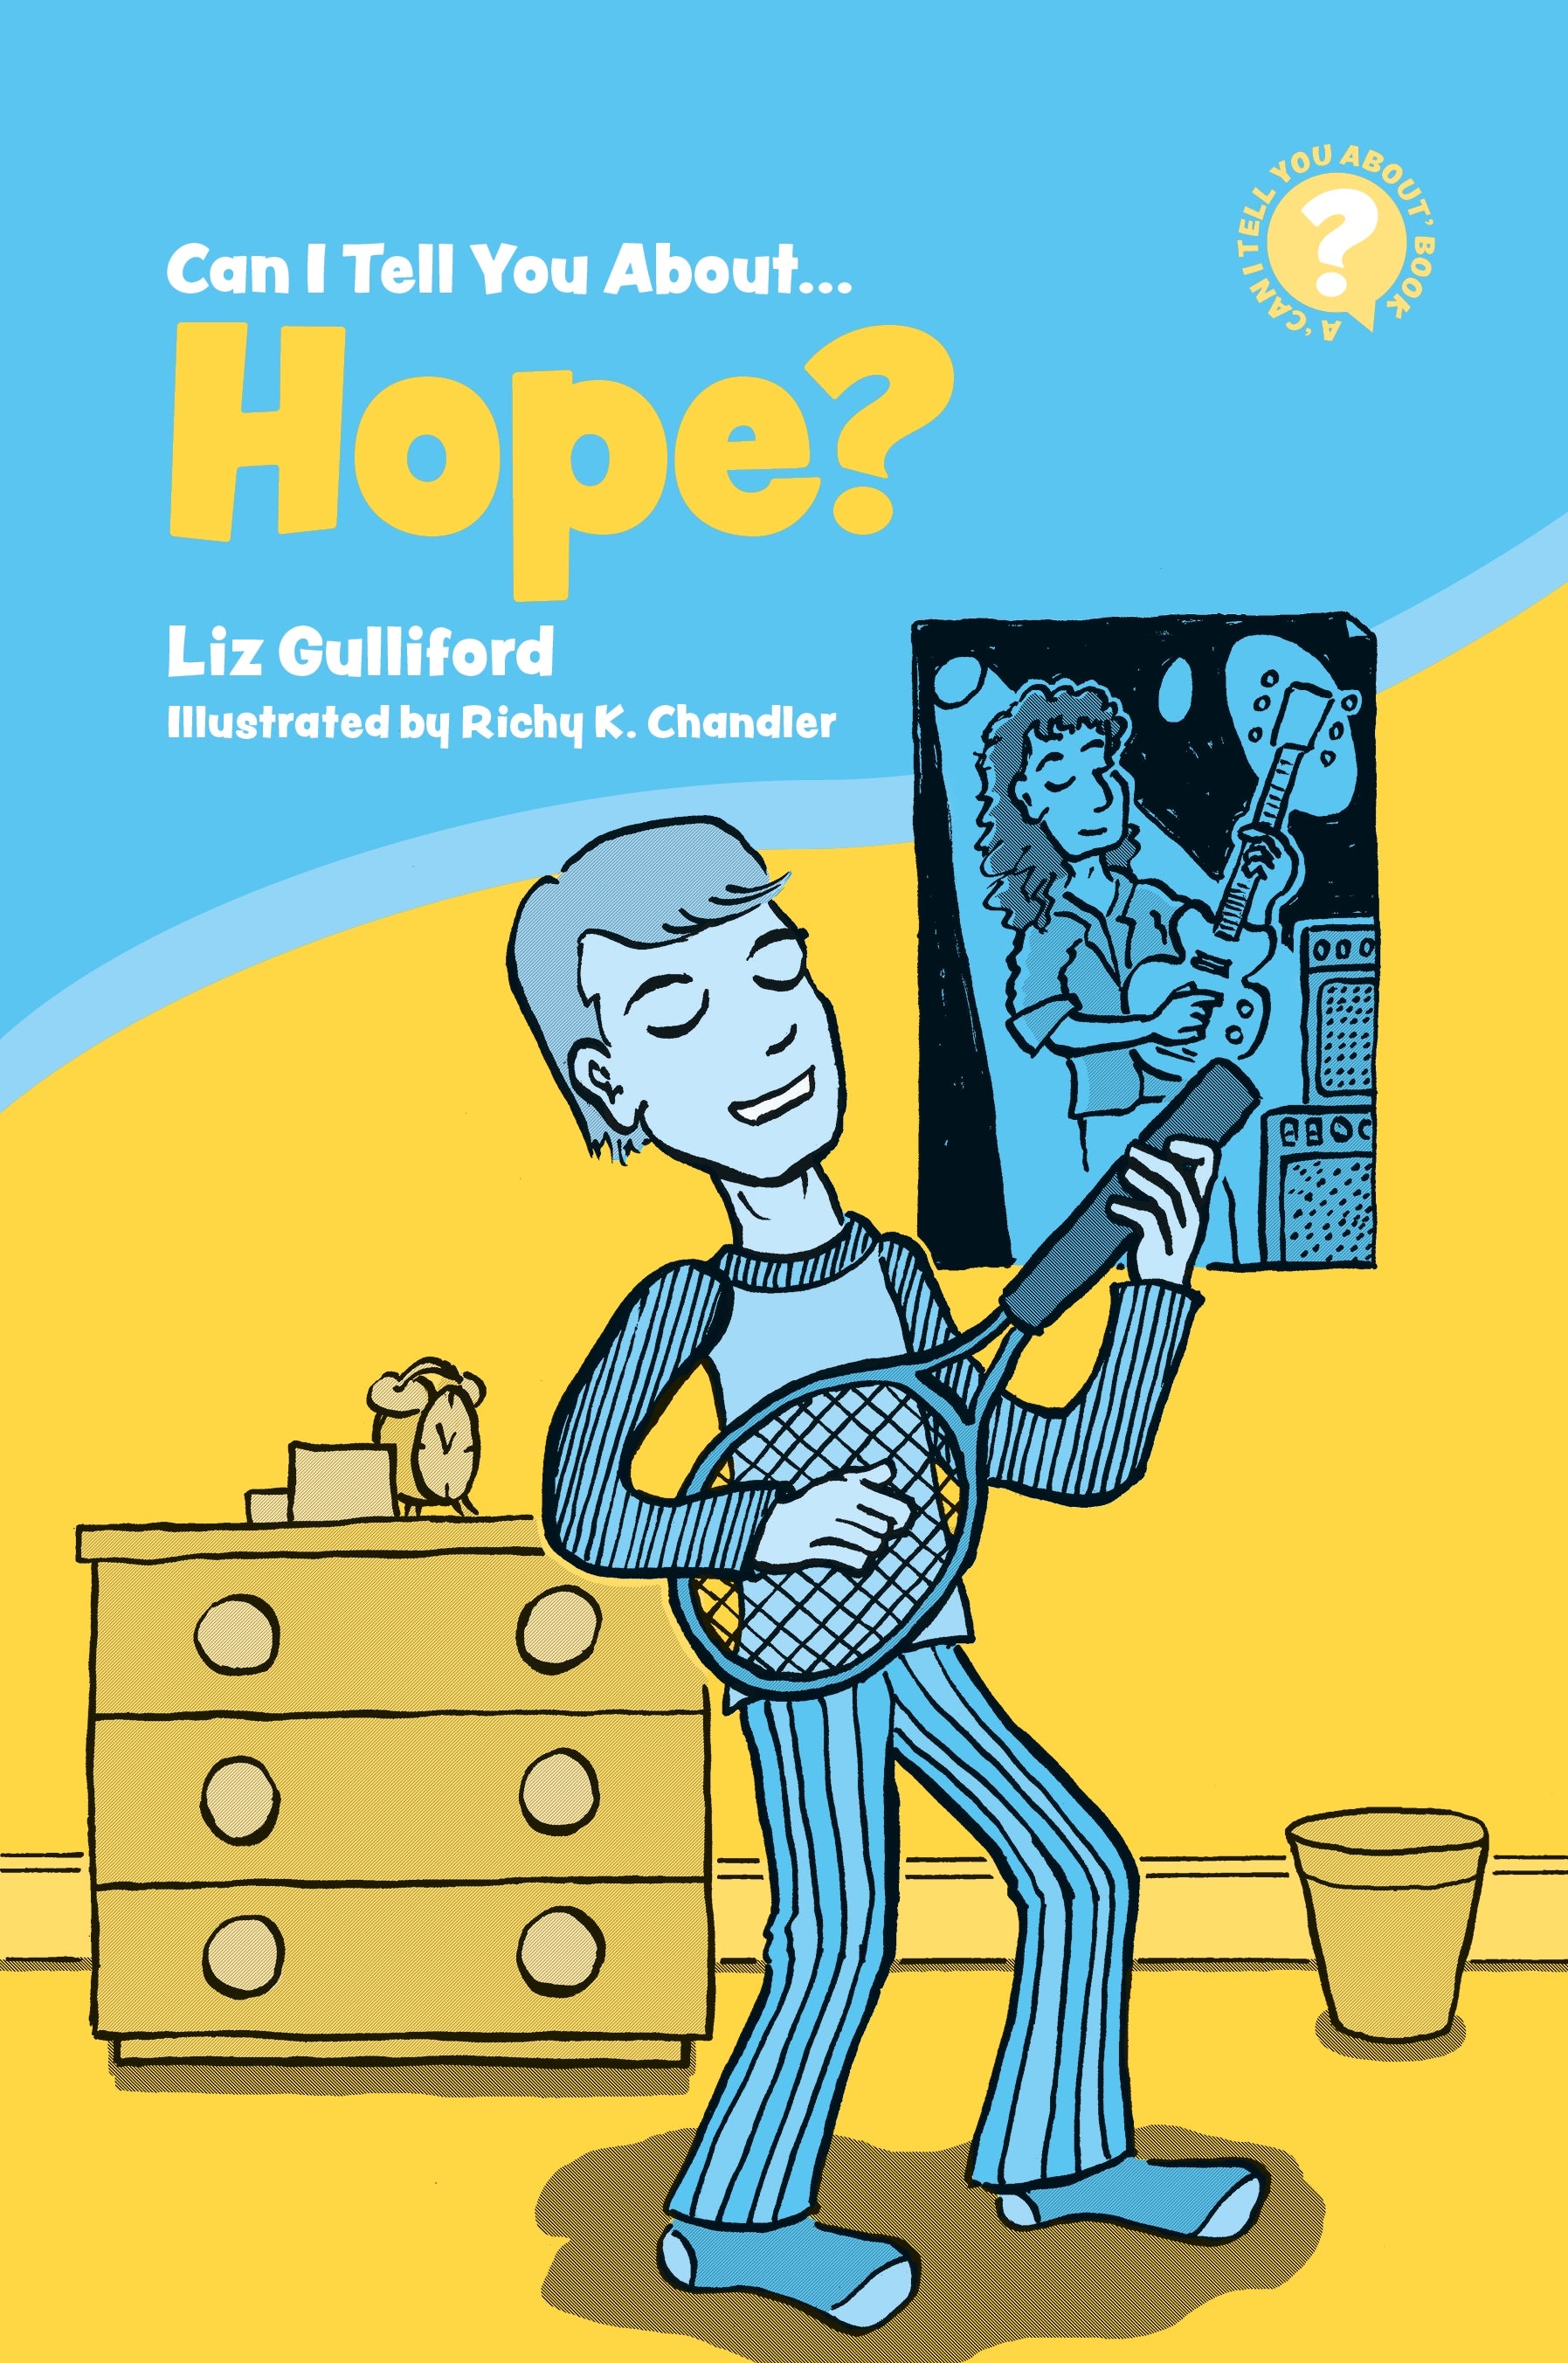 Can I Tell You About Hope? by Liz Gulliford, Richy K. Chandler